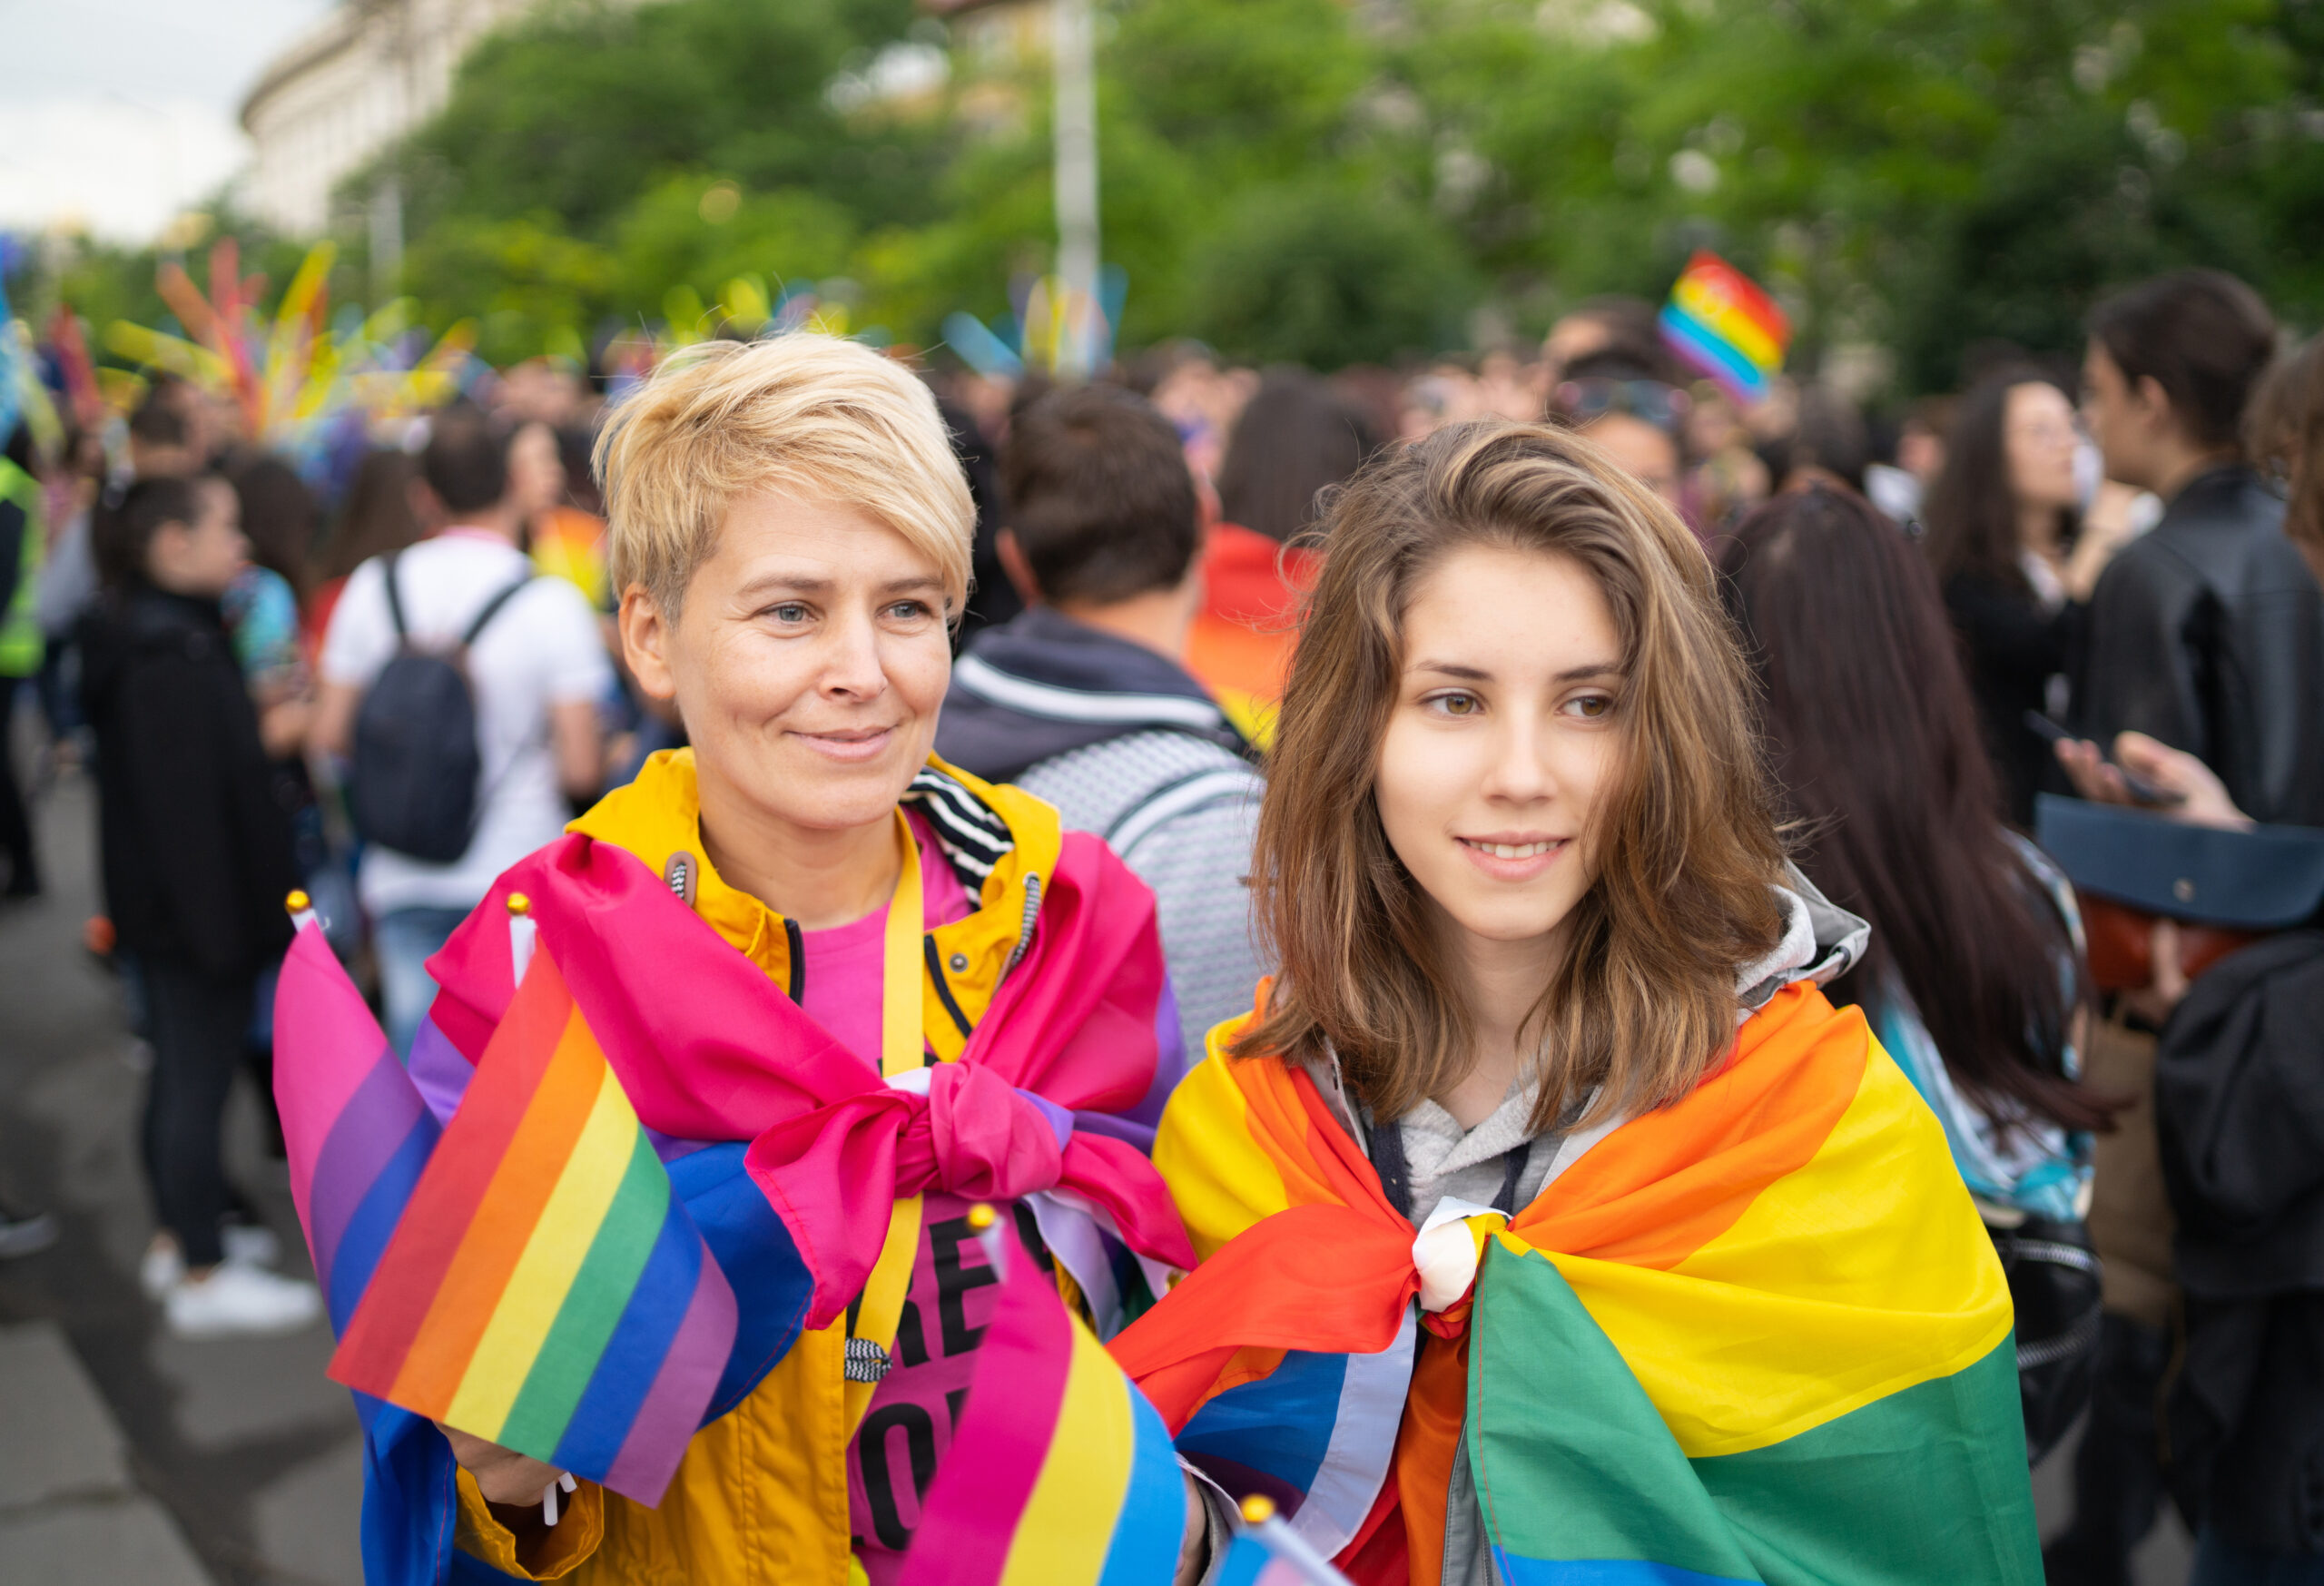 Mother and her daughter stood smiling wrapped in pride rainbow flags